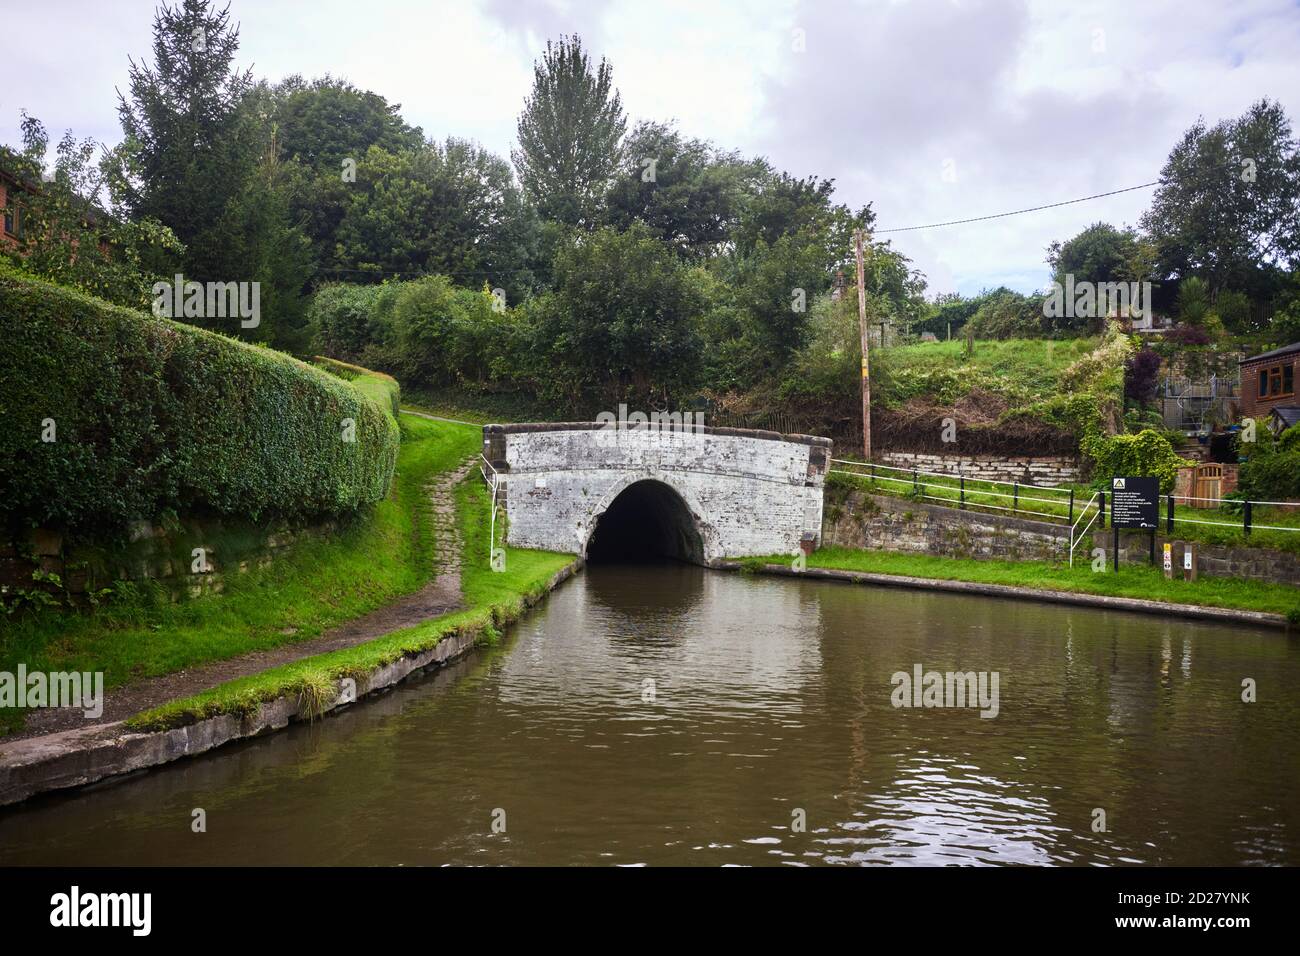 Entrance to the south end of the Barnton Tunnel on the Trent and Mersey canal at Anderton Stock Photo